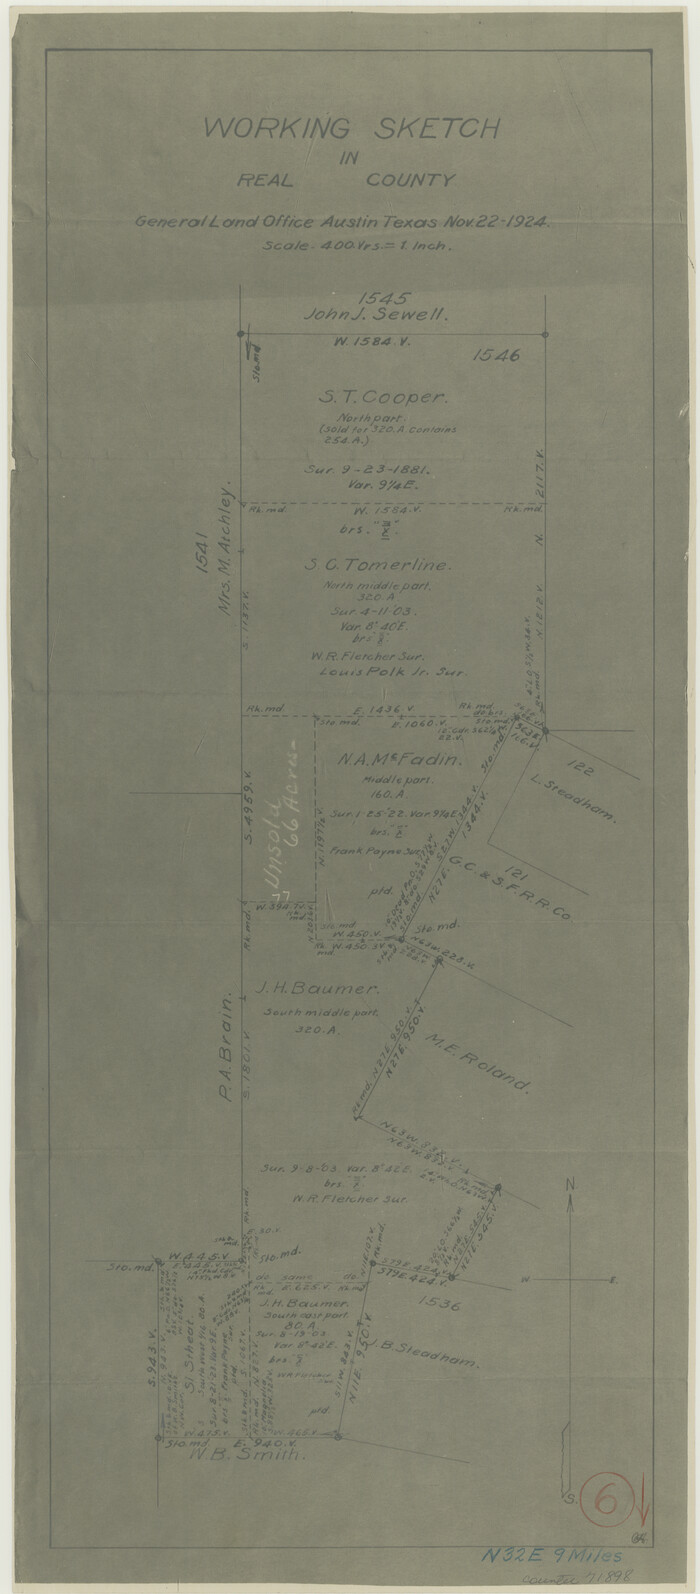 71898, Real County Working Sketch 6, General Map Collection